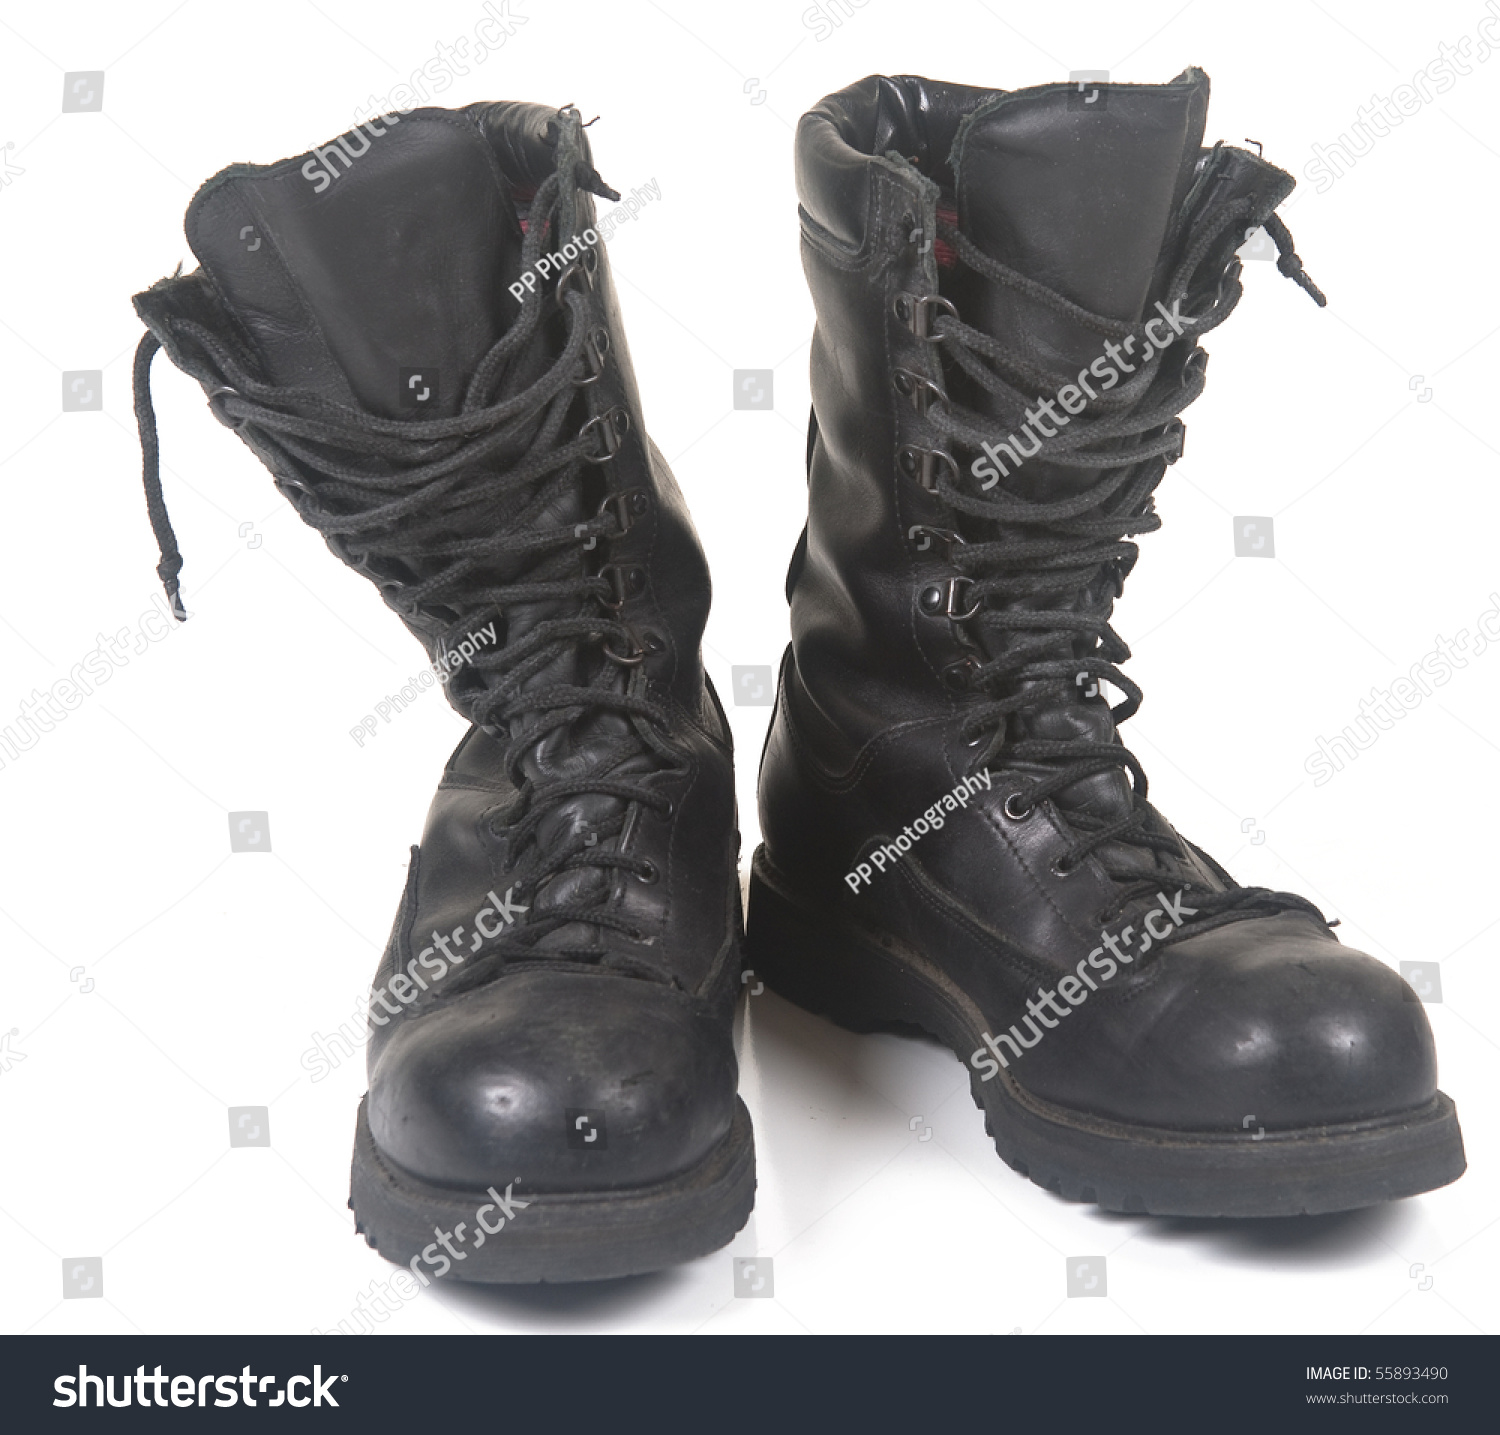 Black Leather Military Boots Stock Photo 55893490 : Shutterstock